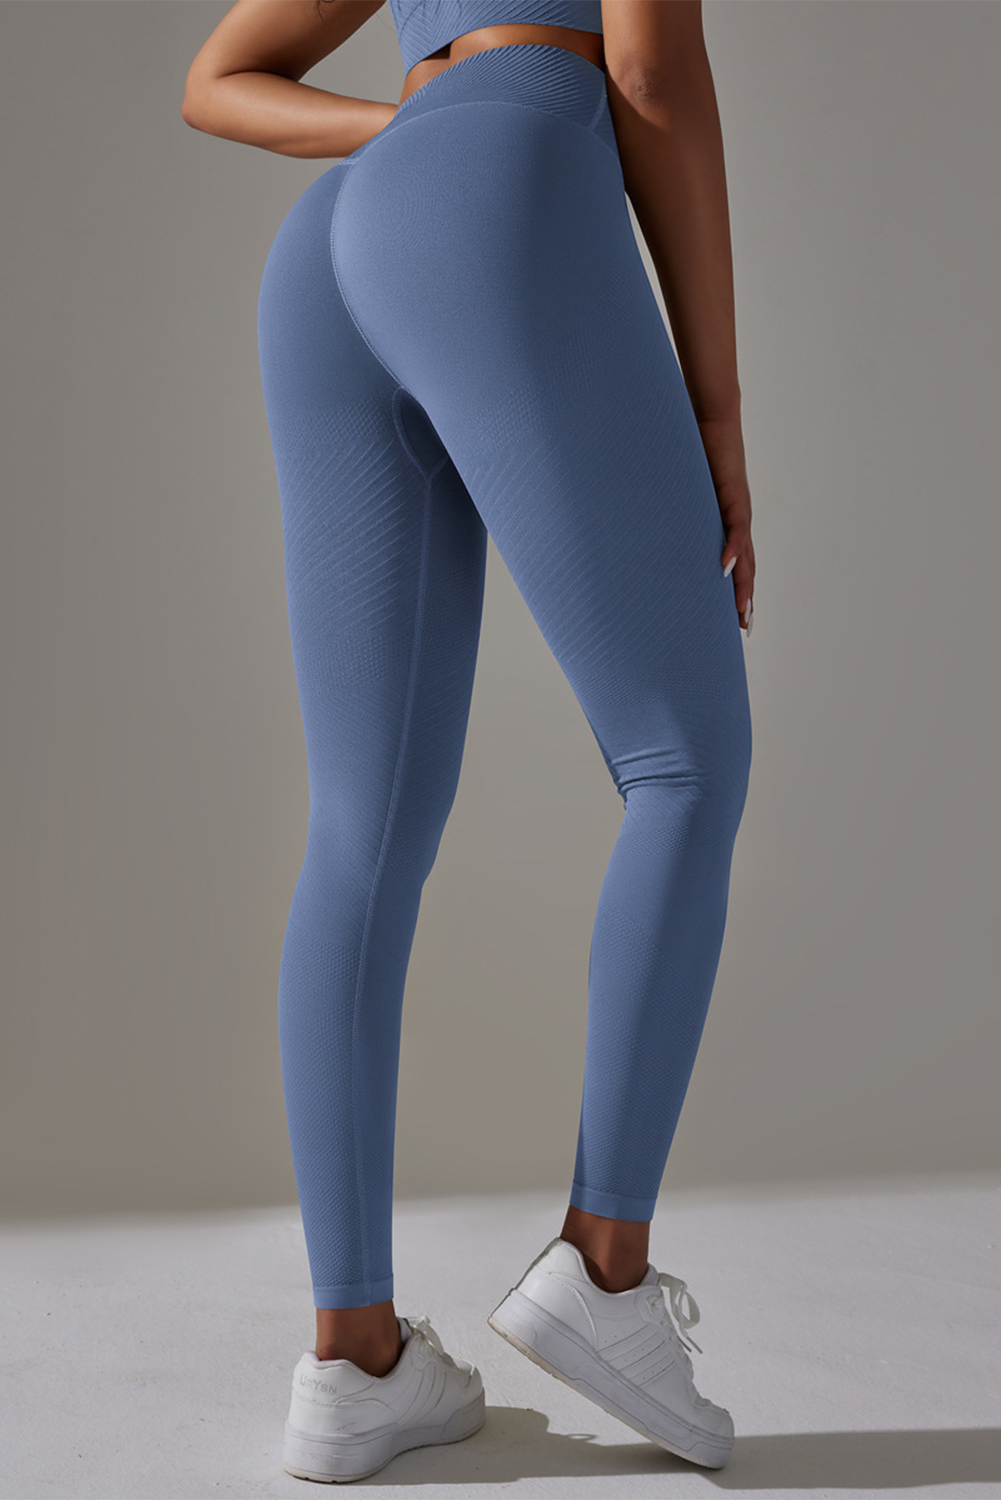 Ashleigh Blue Solid Color High Waist Butt Lifting Active Leggings